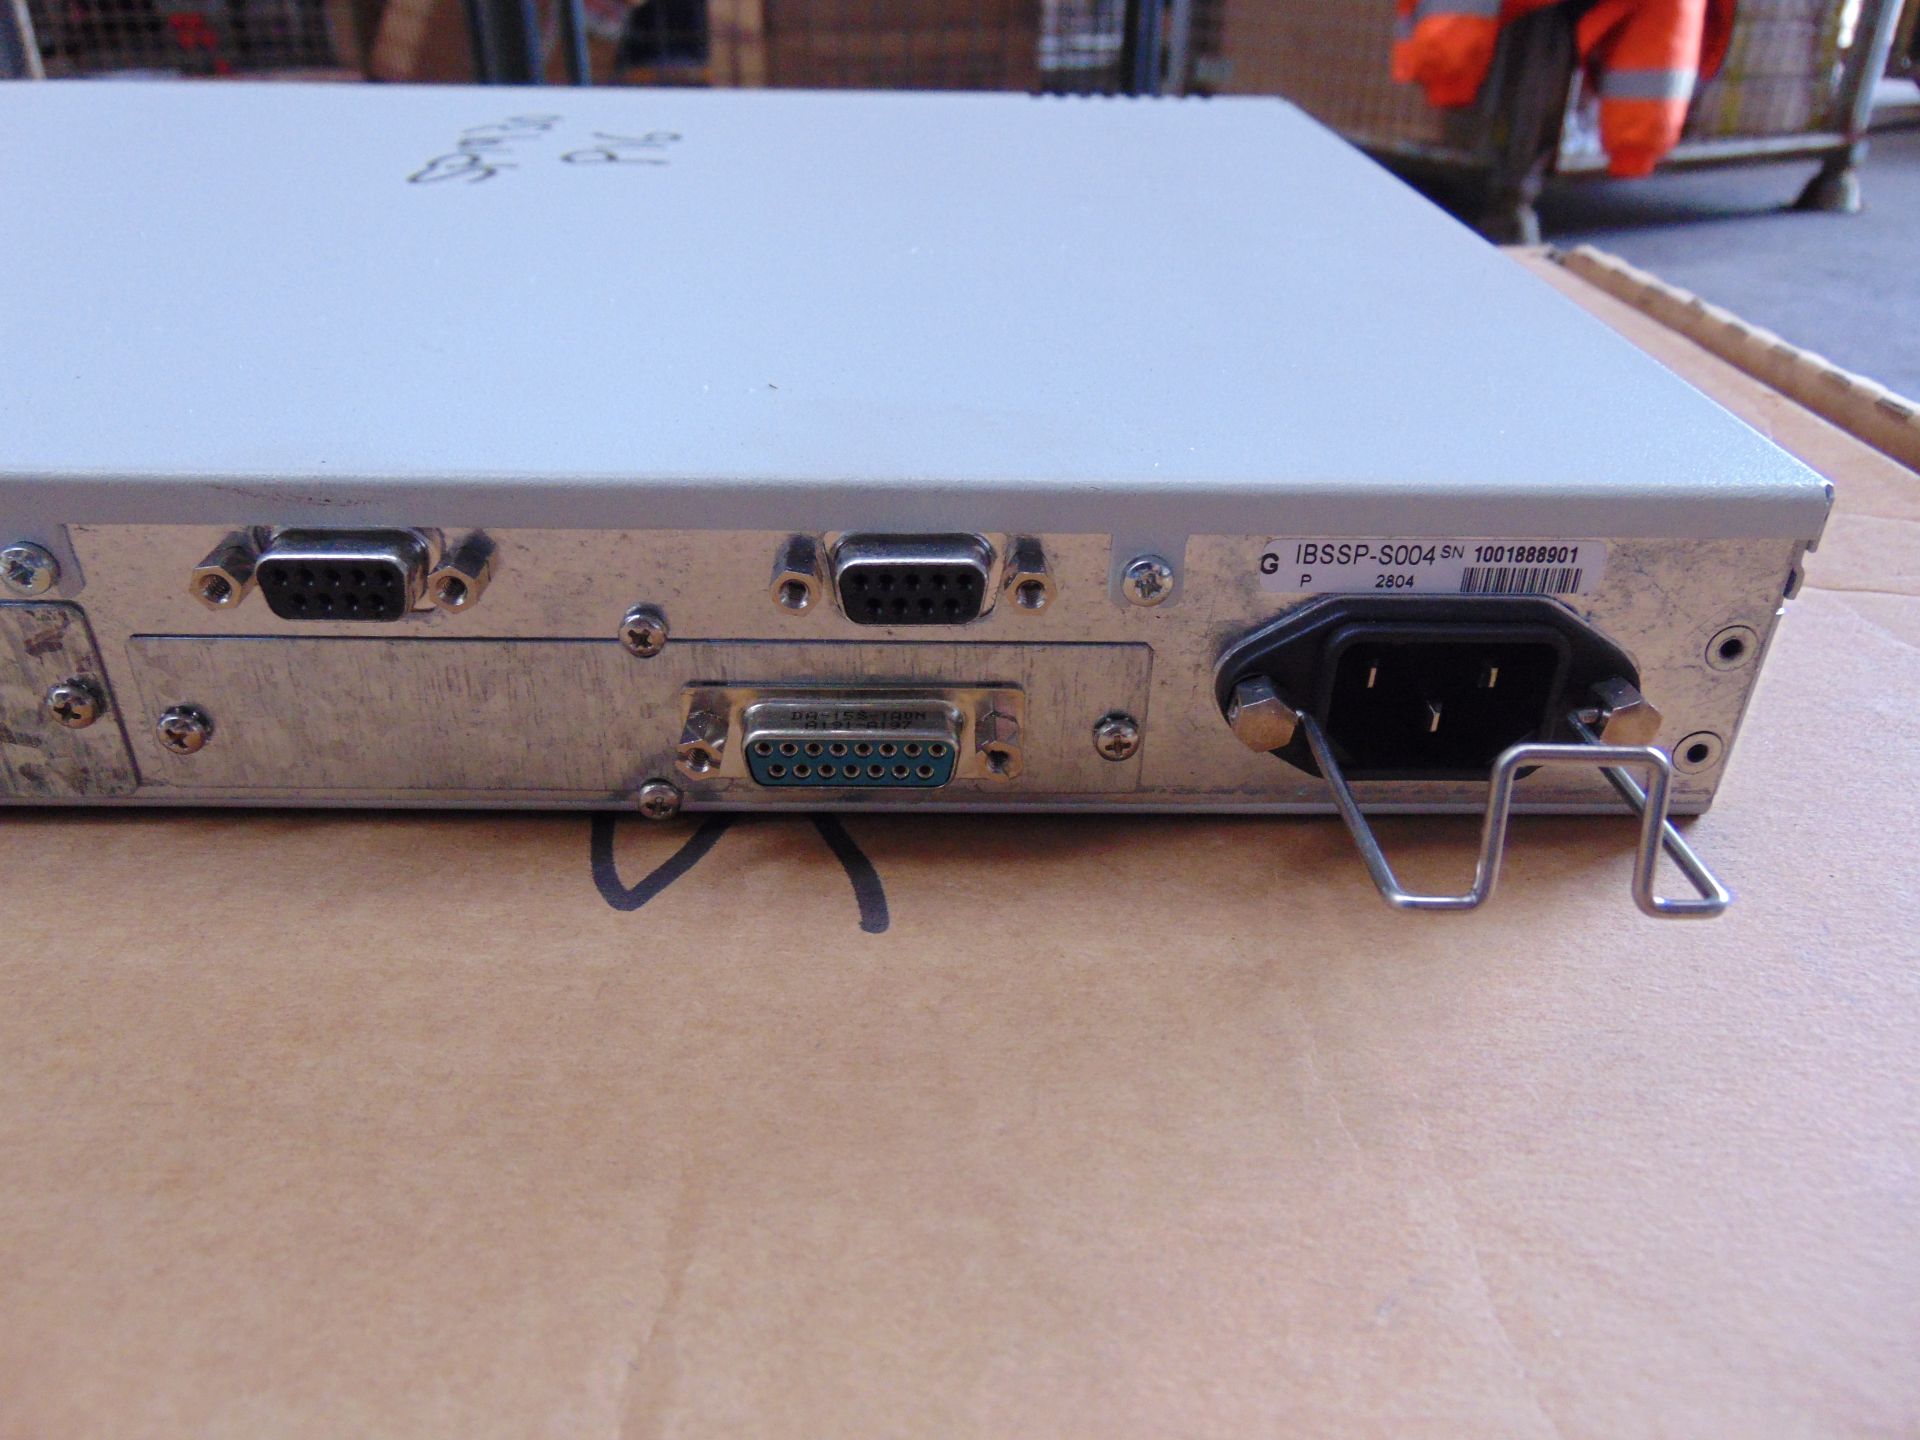 3 x Controlware IBS/ISDN Backup System Ports - Image 6 of 7